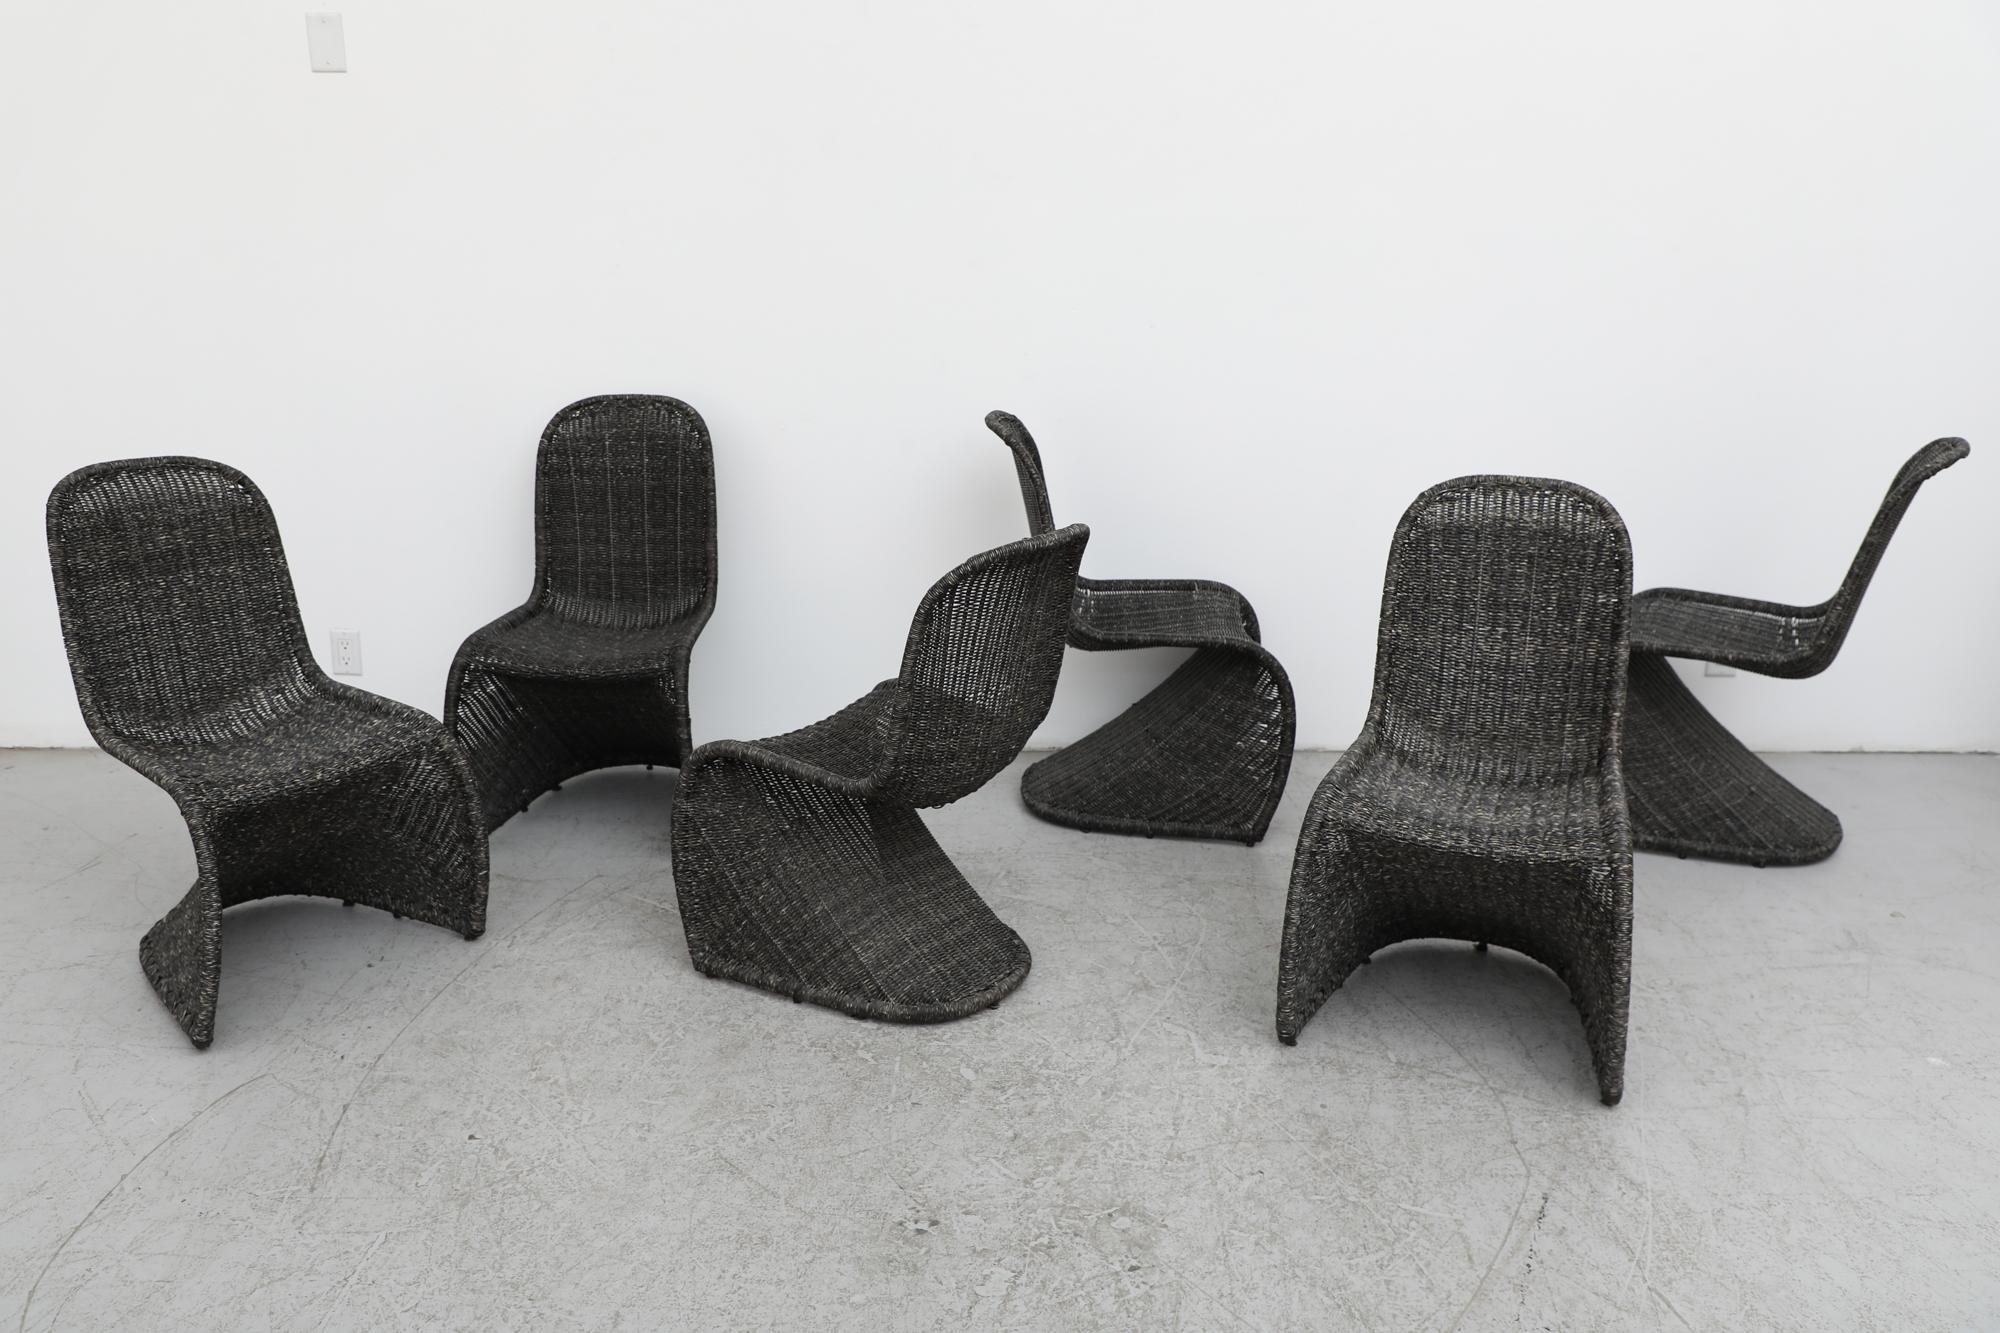 Mid-Century Verner Panton style stacking wicker rattan chairs. Reminiscent of the Panton chair which, in the annals of furniture design, is an absolute classic. That chair was designed by Verner Panton in 1959 and developed for mass production in